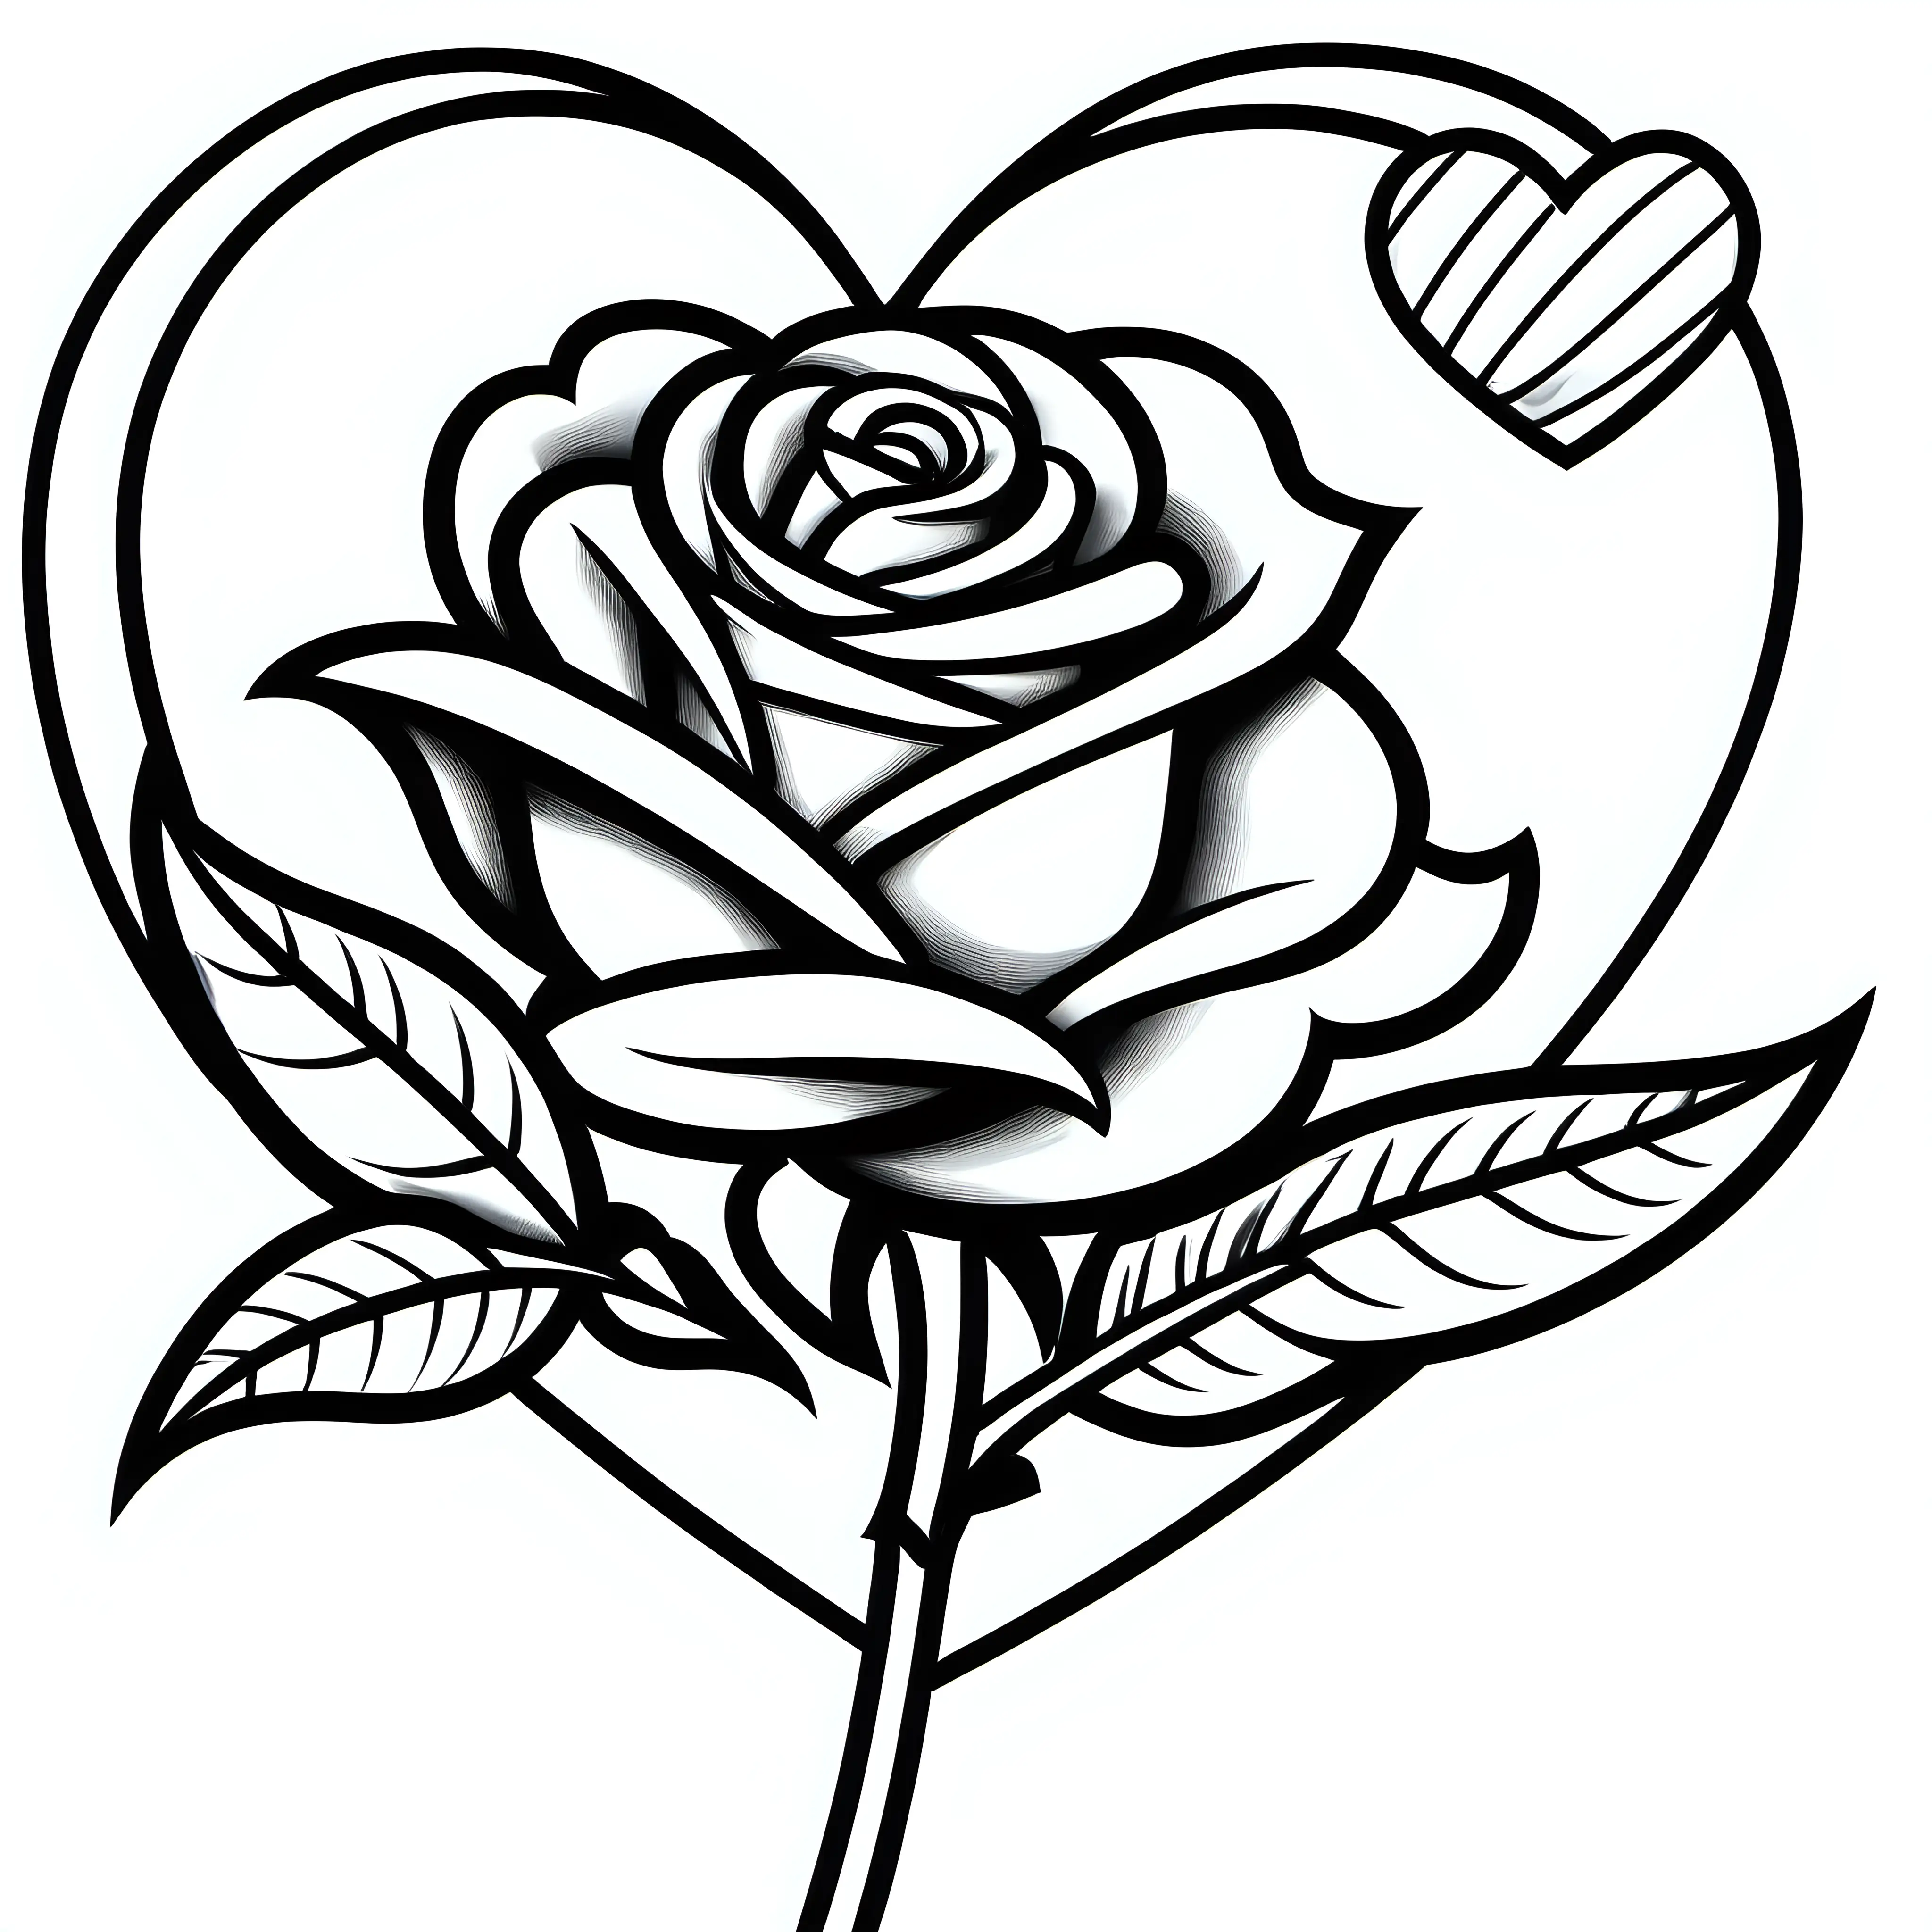 Valentines Day Coloring Page Cartoon Rose and Heart